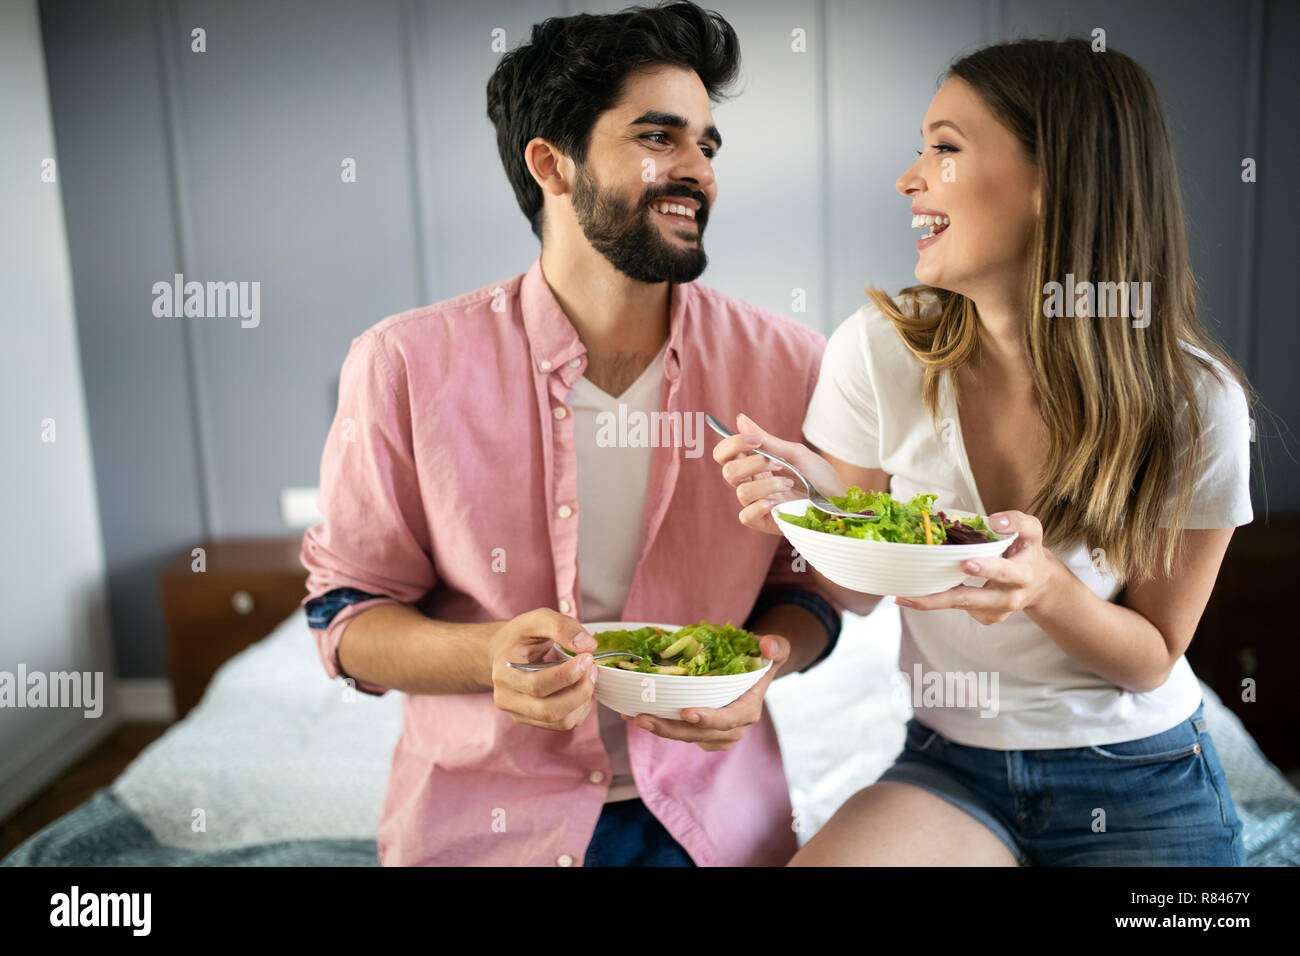 Beautiful young playful couple eating salad together at home Stock Photo